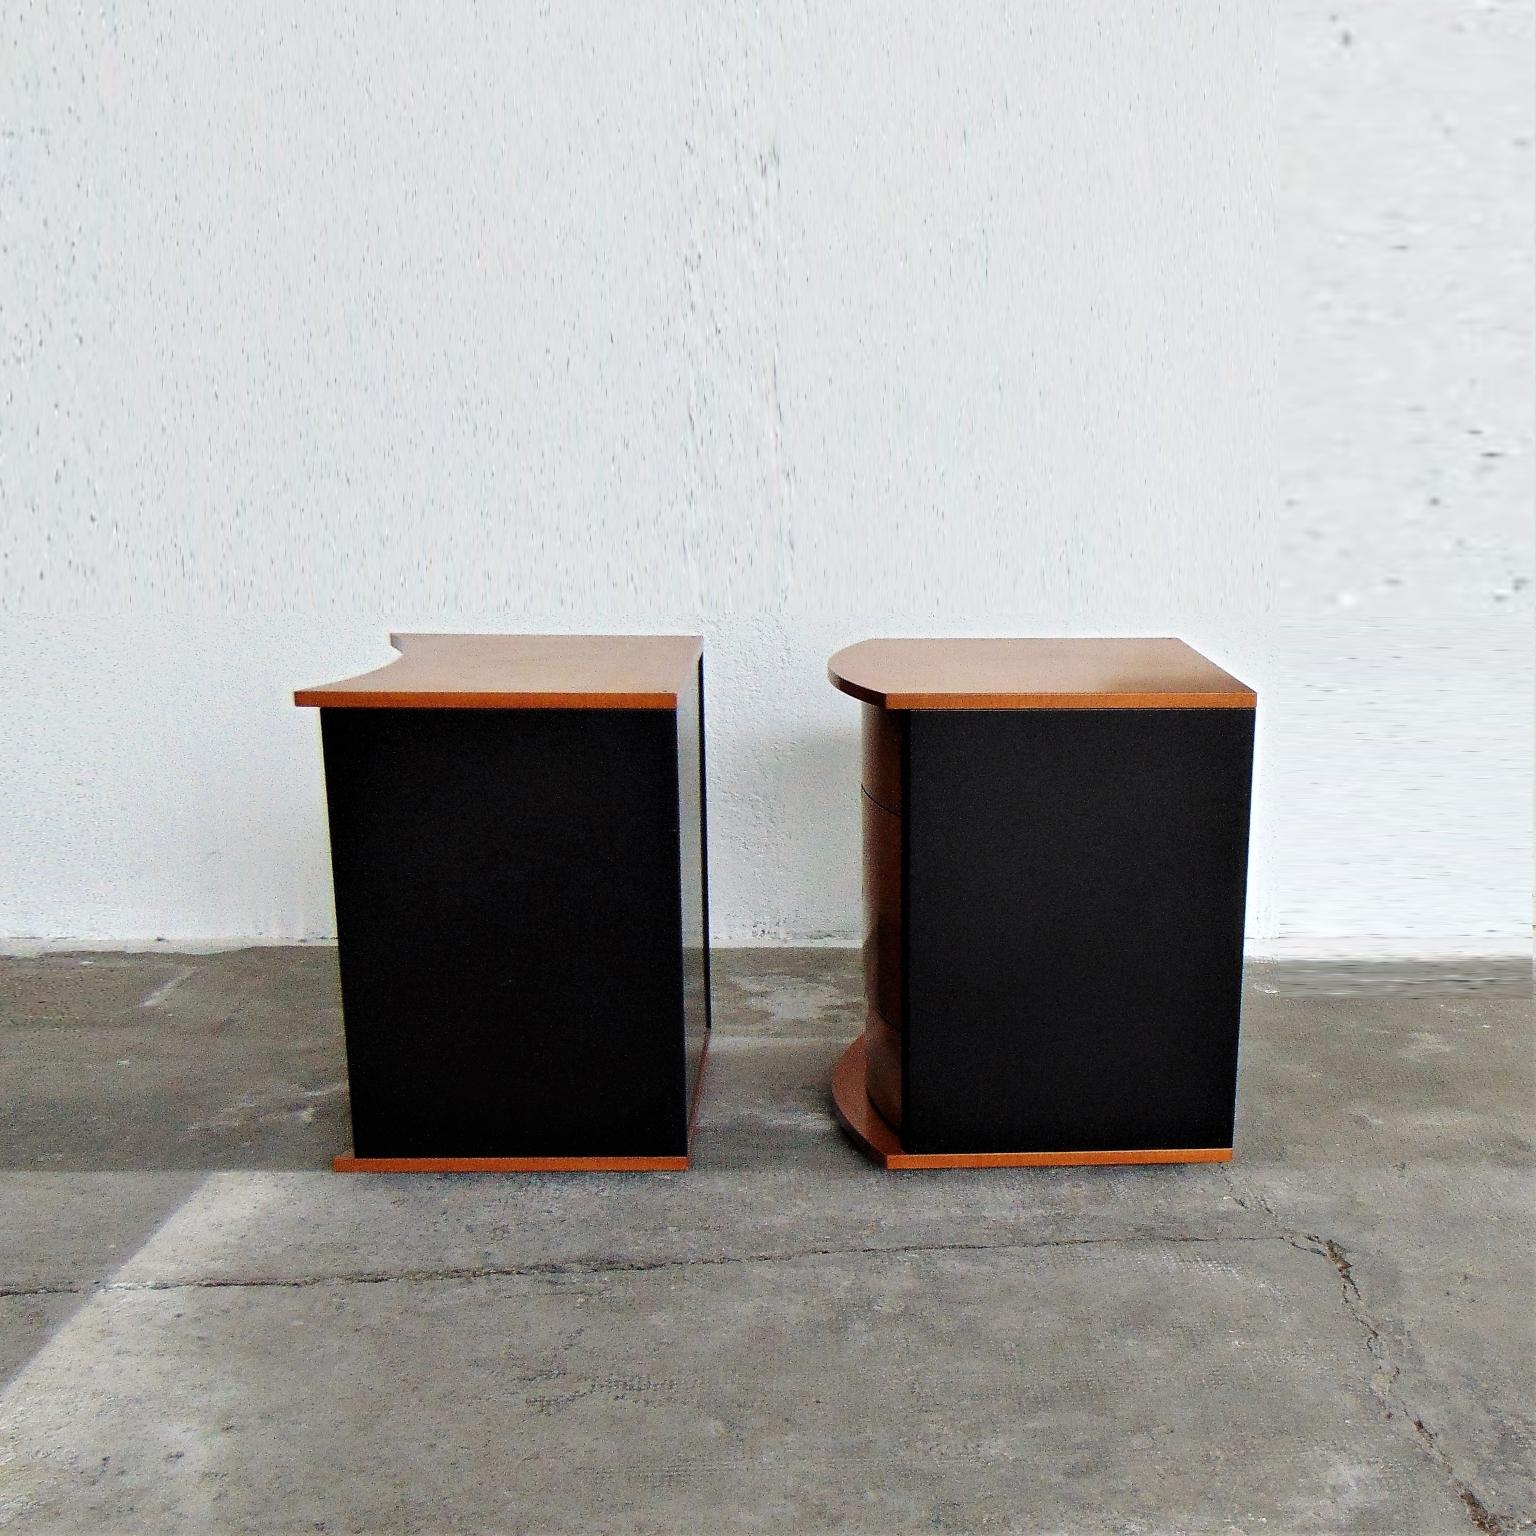 1990s Set of 2 Nightstands Walnut Stained Cherry and Black Lacquer, Roche Bobois For Sale 7